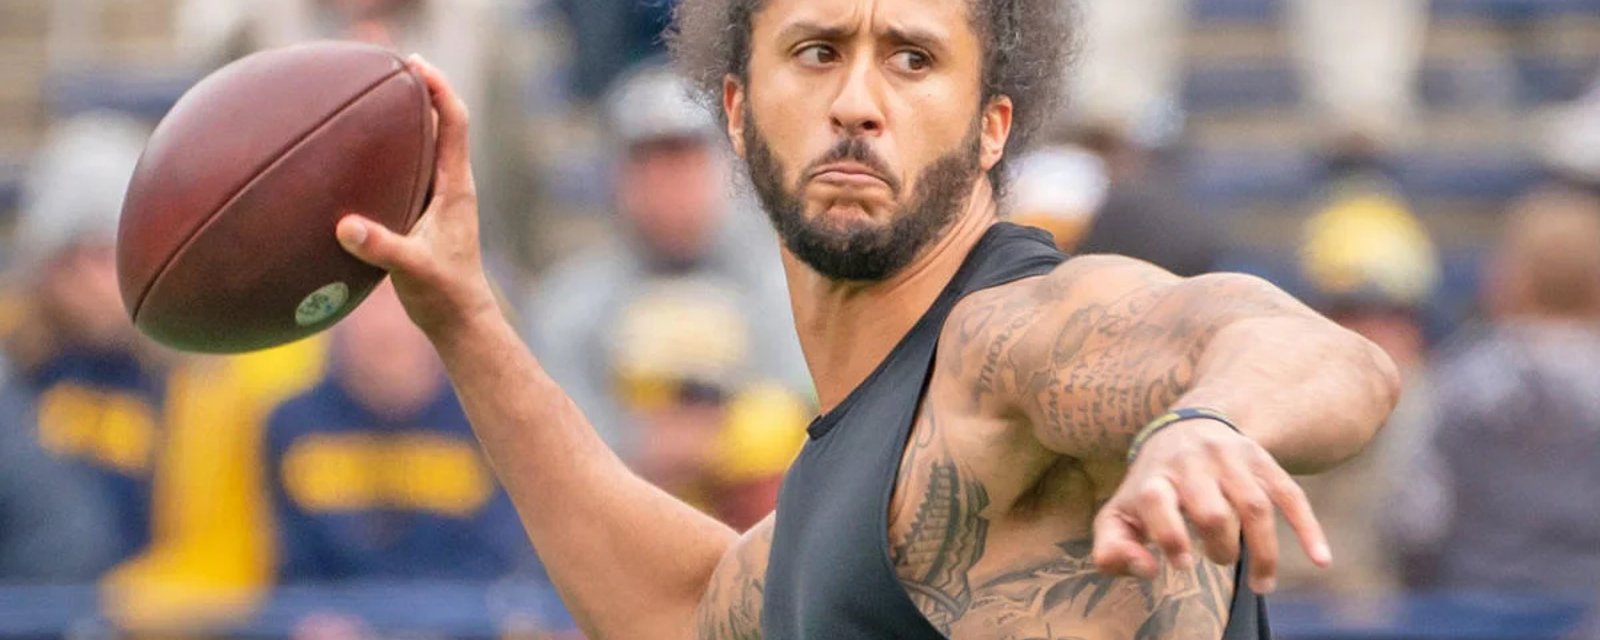 Colin Kaepernick calls out Raiders for not signing him 